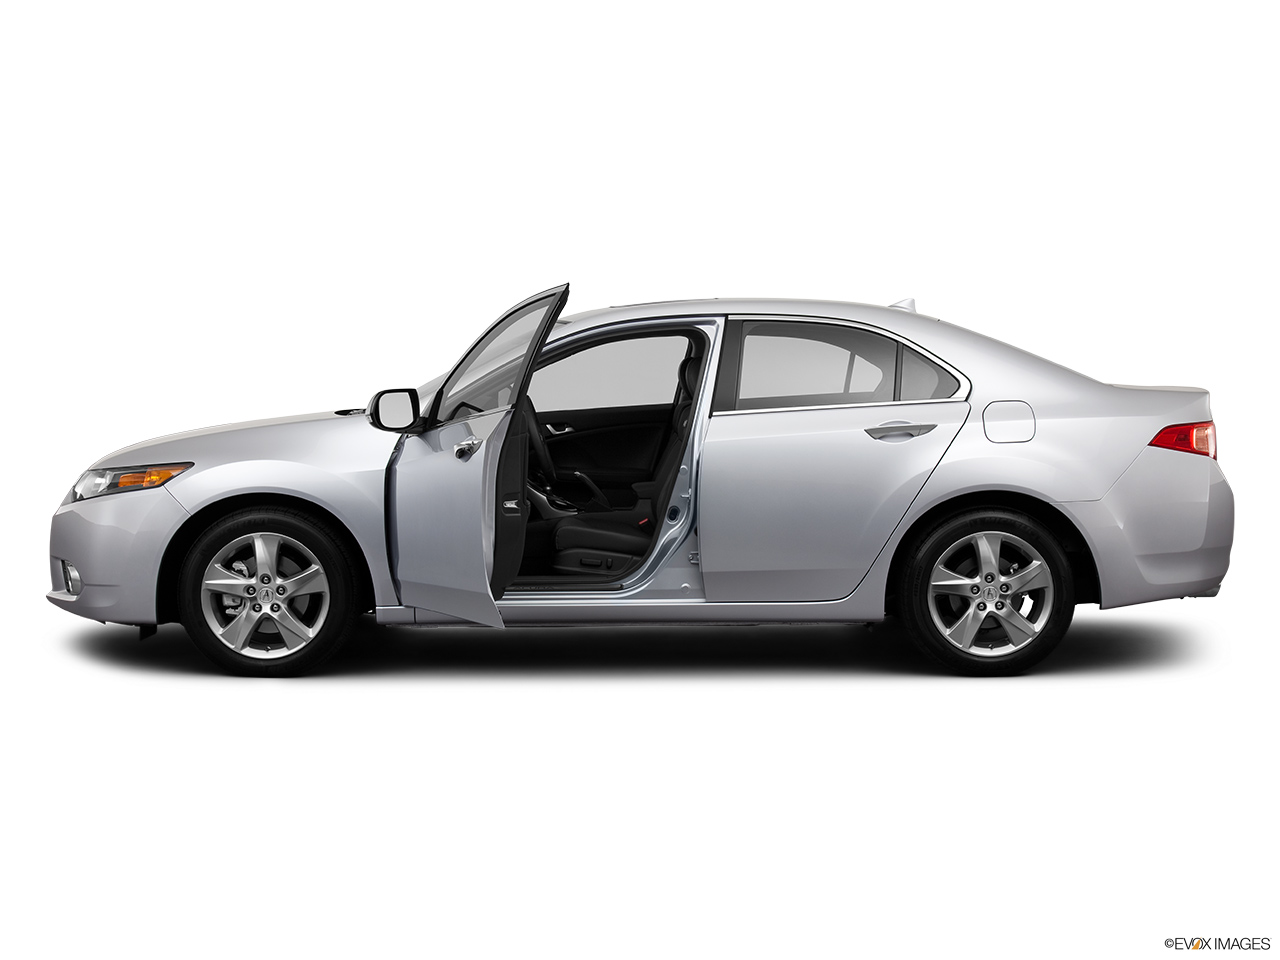 2013 Acura TSX 5-speed Automatic Driver's side profile with drivers side door open. 